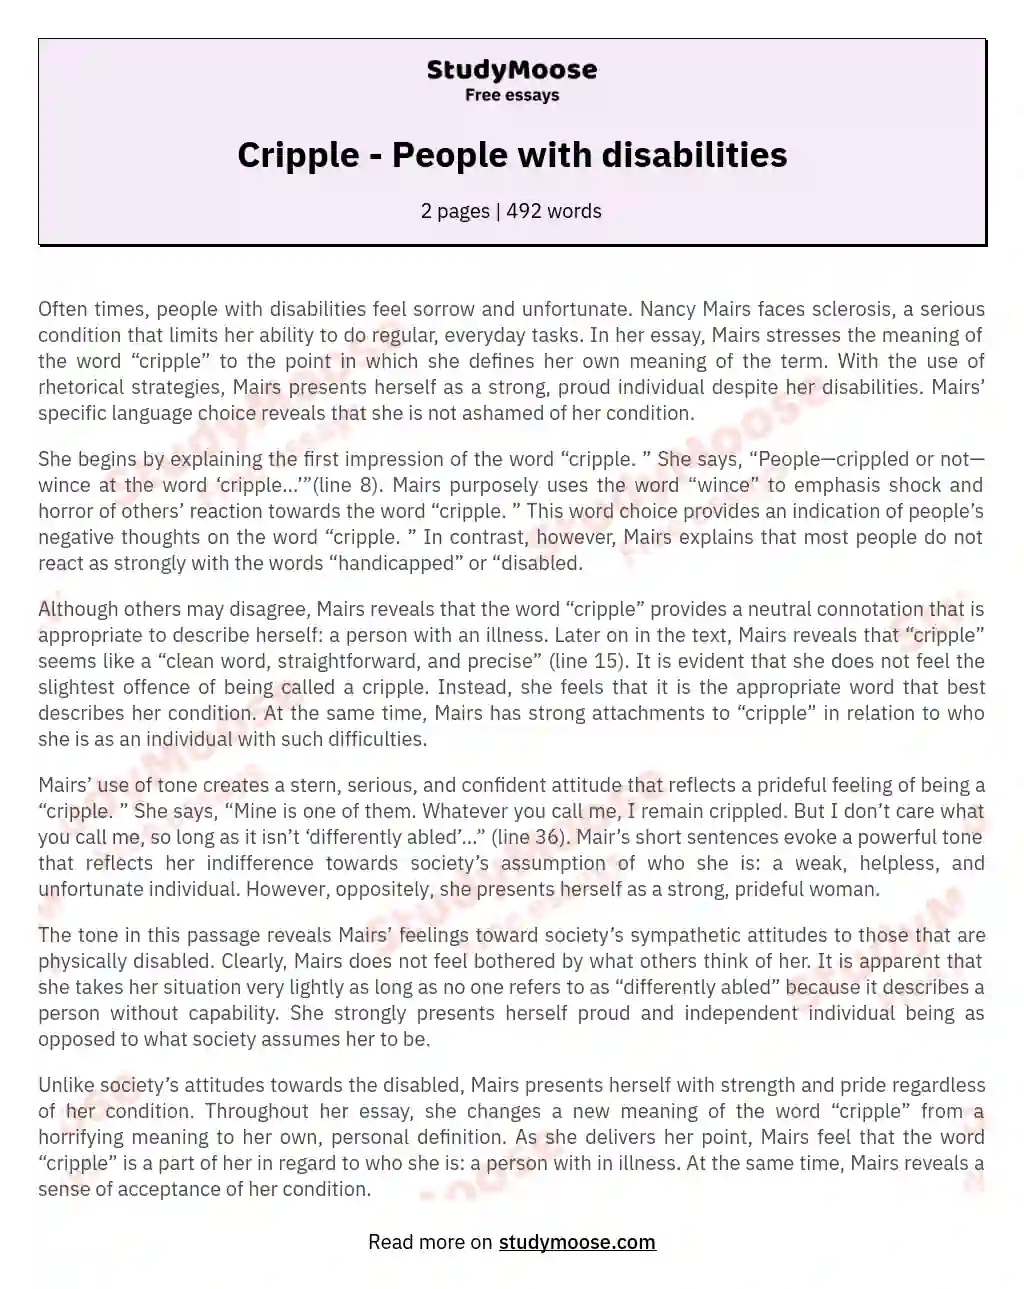 Embracing Resilience: Nancy Mairs' Redefinition of "Cripple" essay